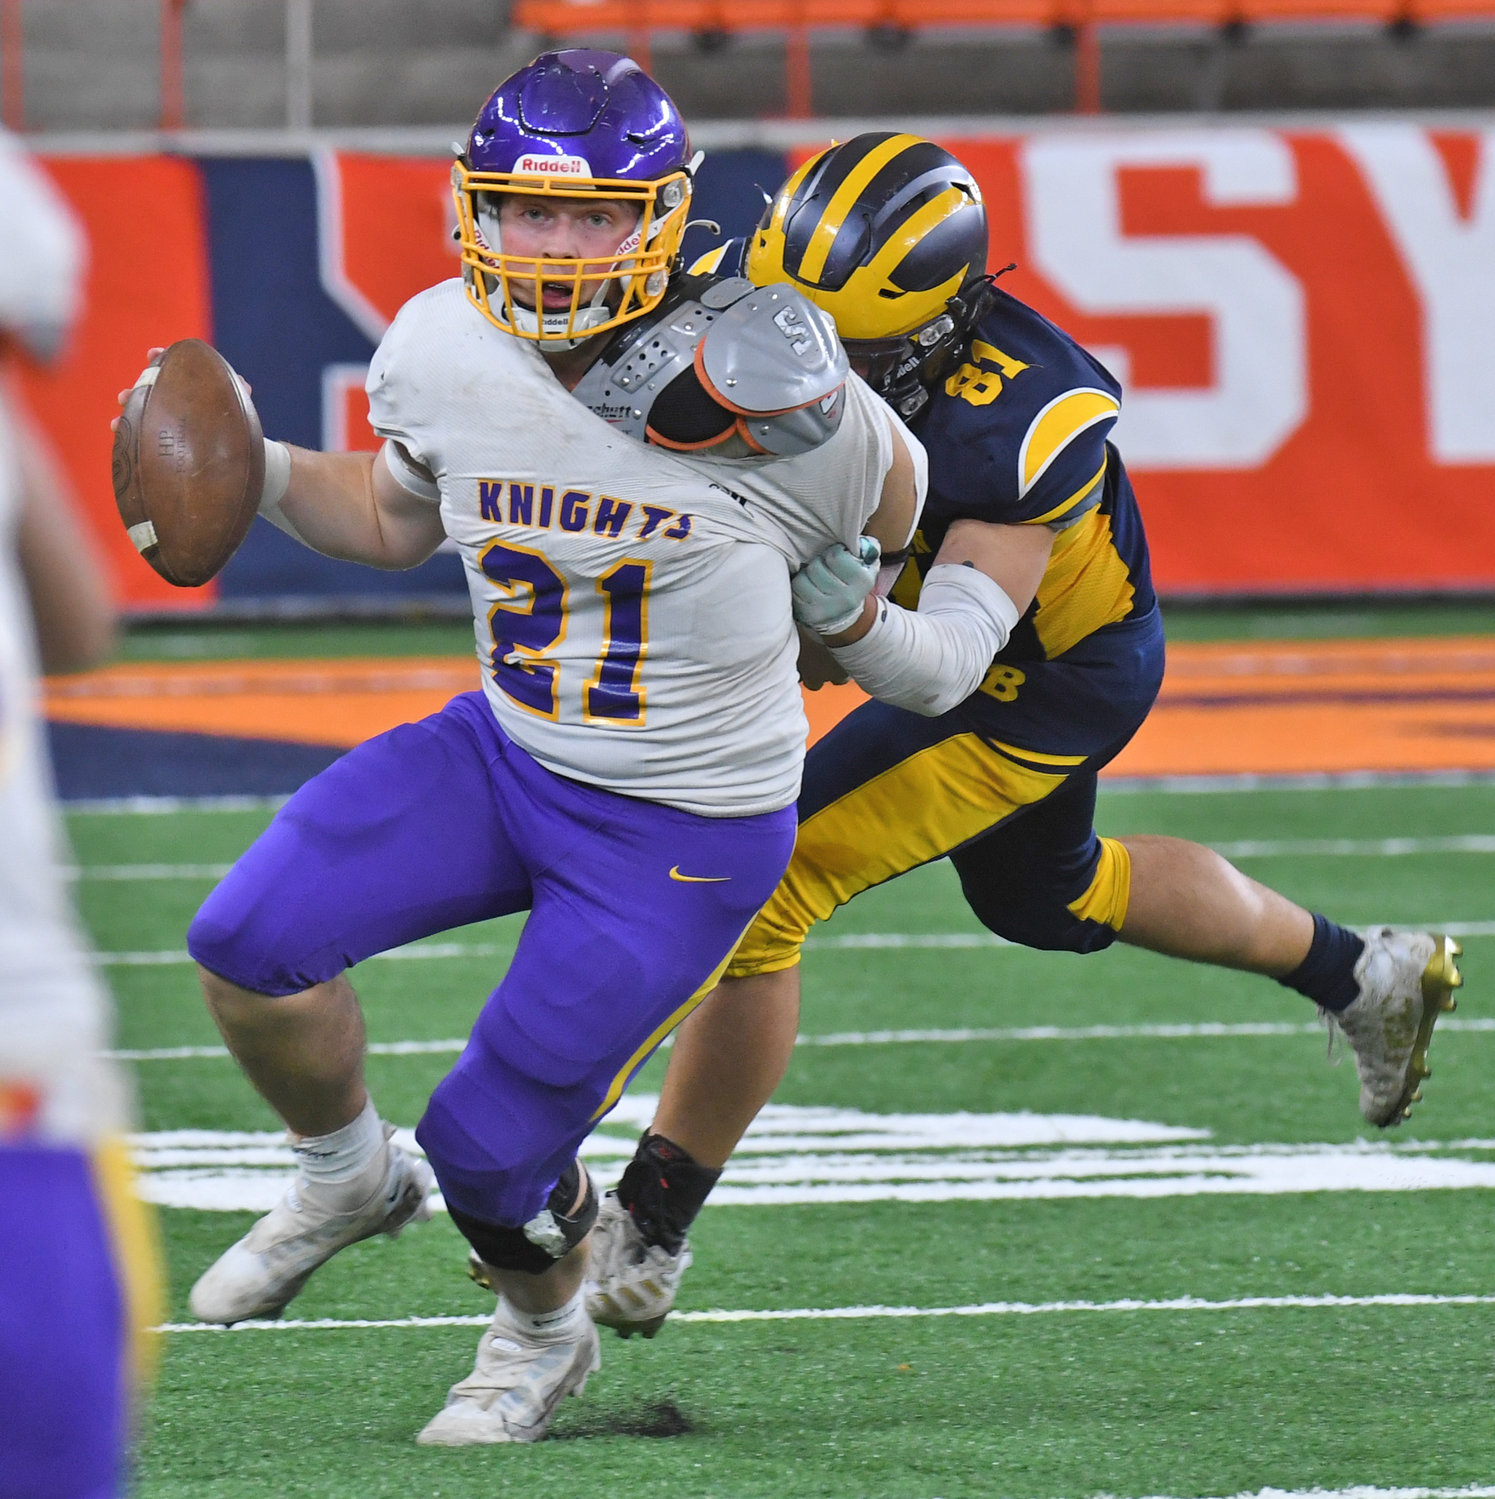 Holland Patent quarterback Jonathan Zylynski looks to throw the ball but is wrapped up by General Brown’s Devin Hicks in the second quarter at JMA Wireless Dome Sunday in the Section III Class C championship game. General Brown won 41-0.